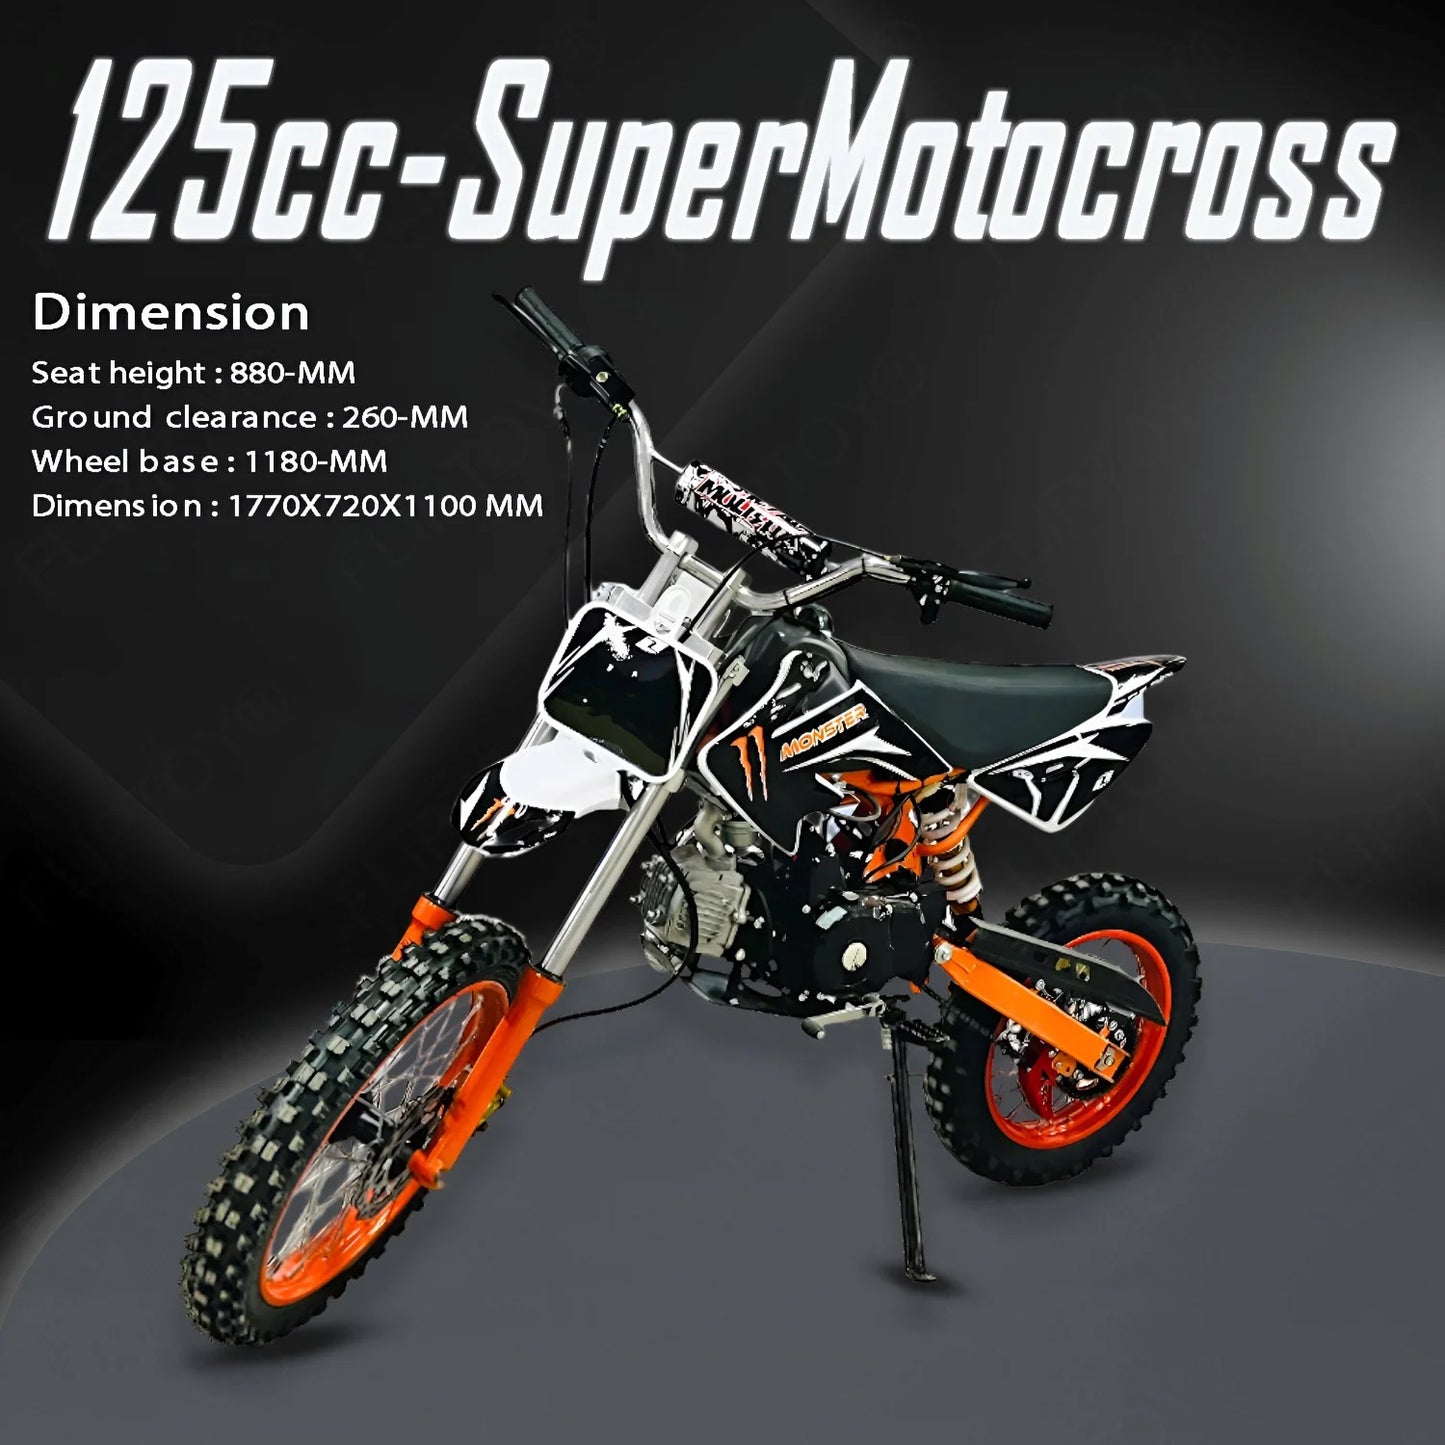 125cc-Dirt bike for adults/youngsters | 125cc 4 stroke engine | For age group-above 15 | off-road bikes | dirt bike for adults in india